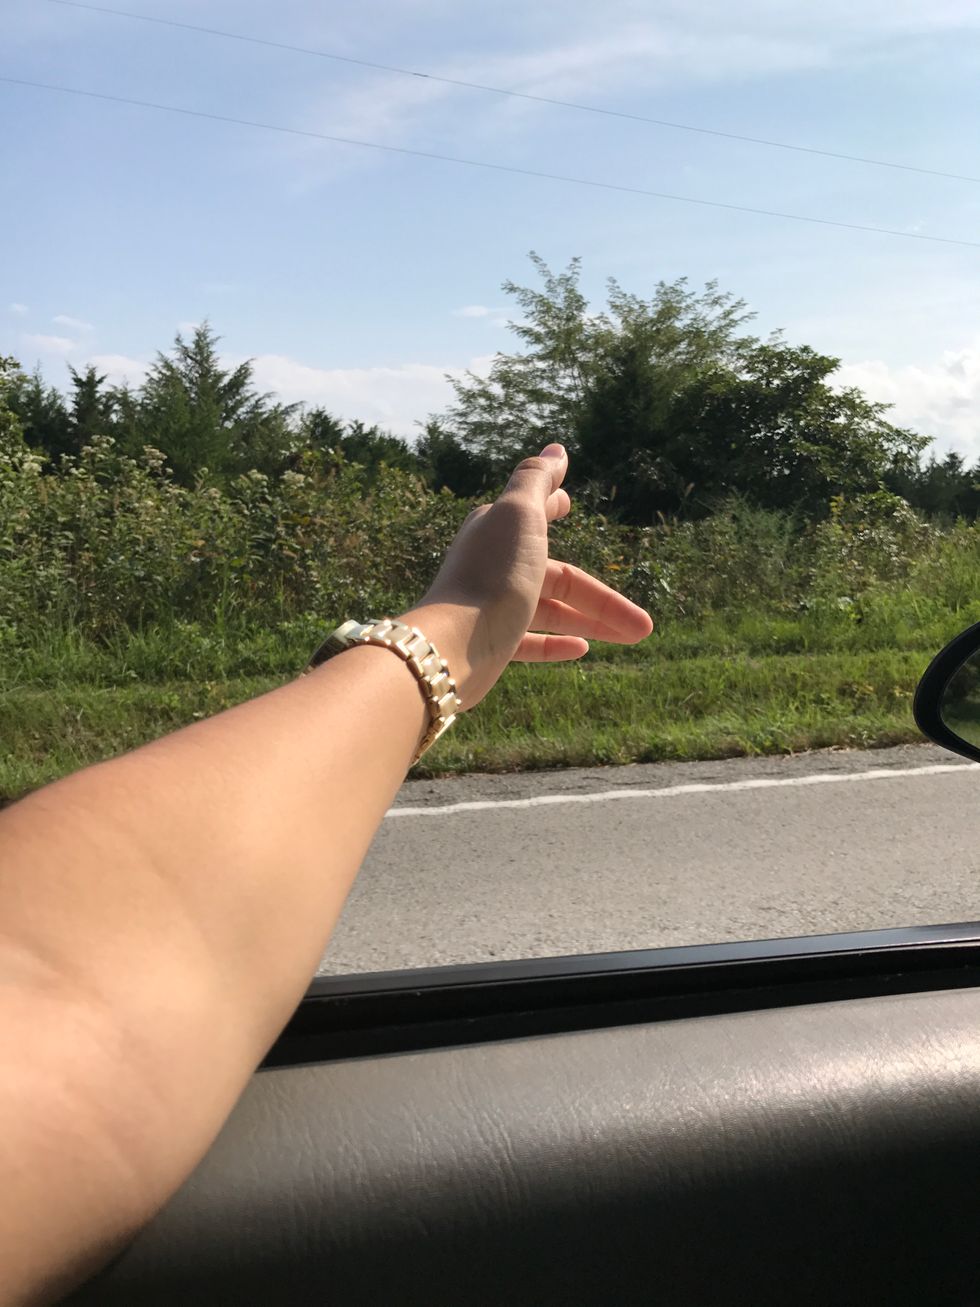 A Note To Drivers, From A Girl Who Does Not Want To Die